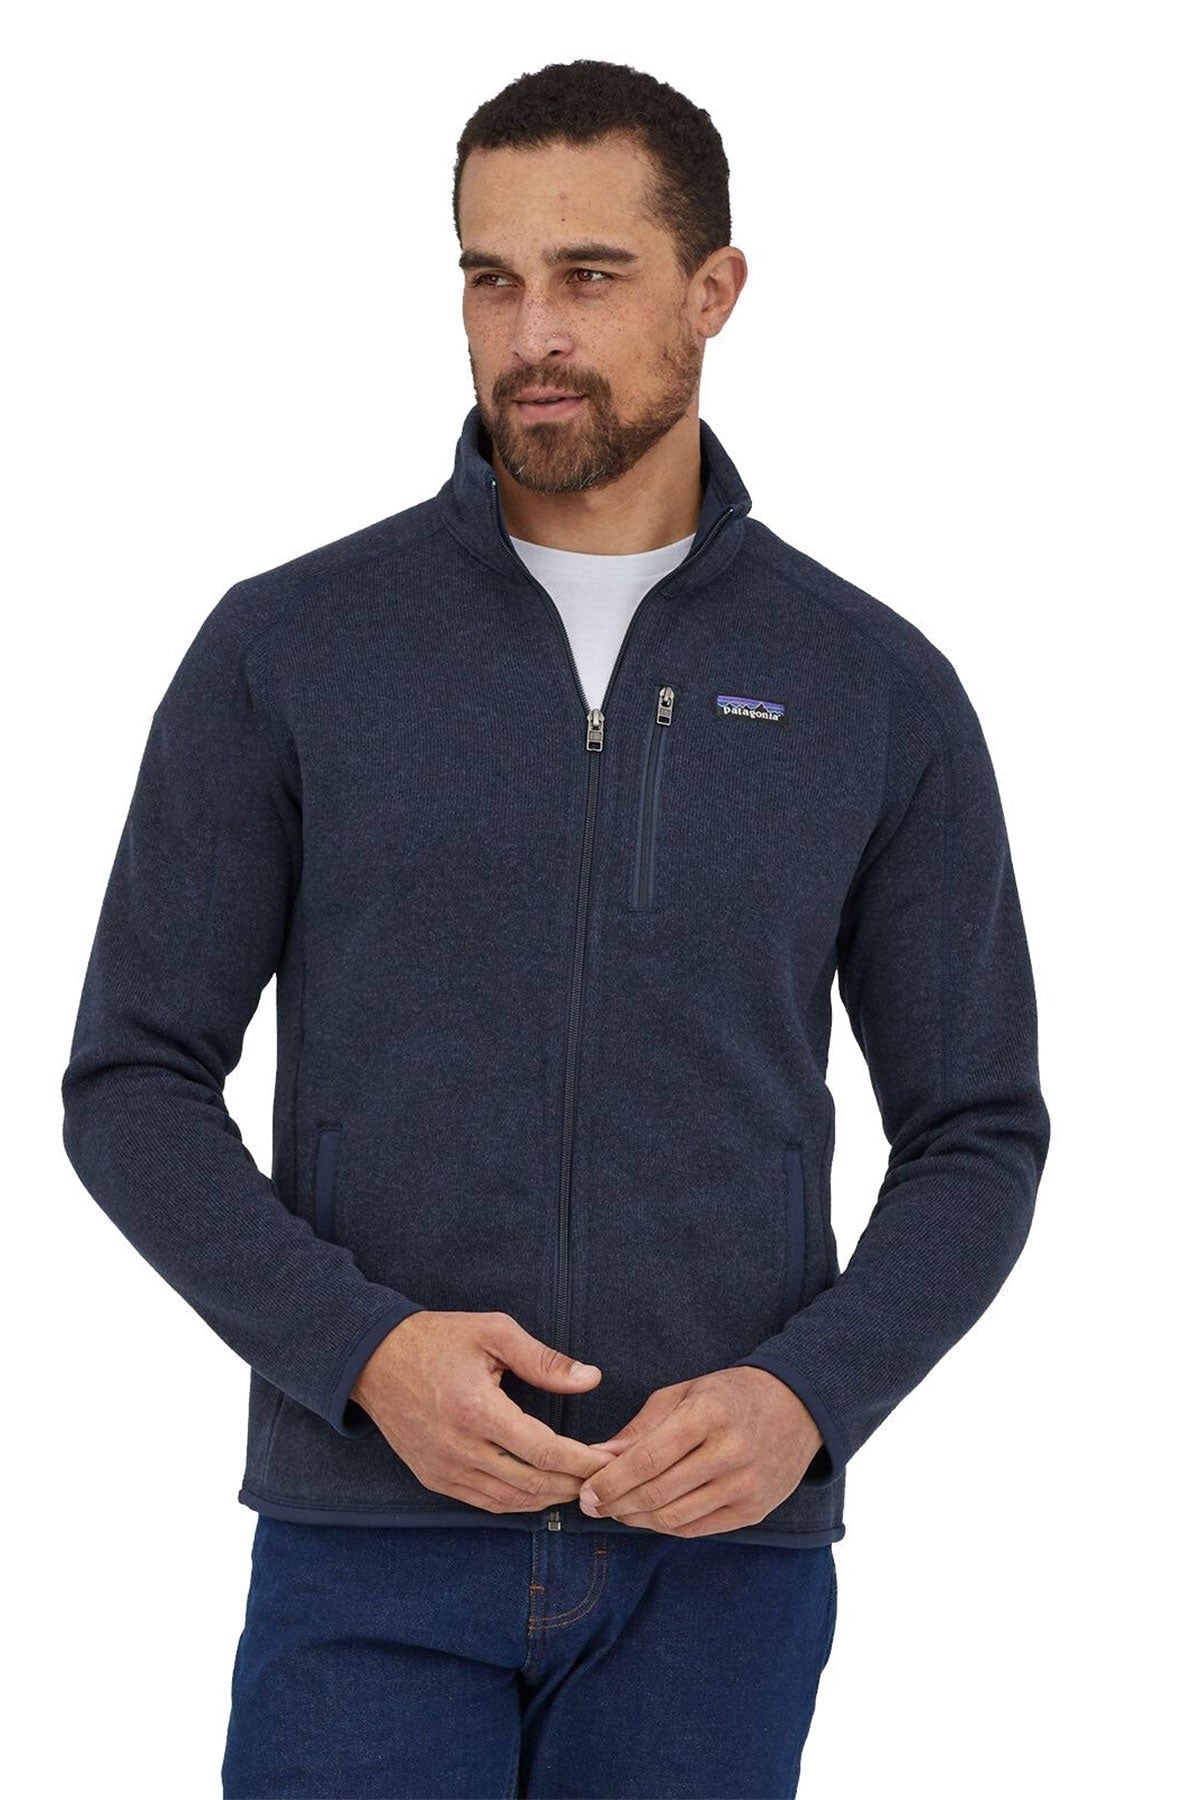 Branded Patagonia Better Sweater Jacket New Navy